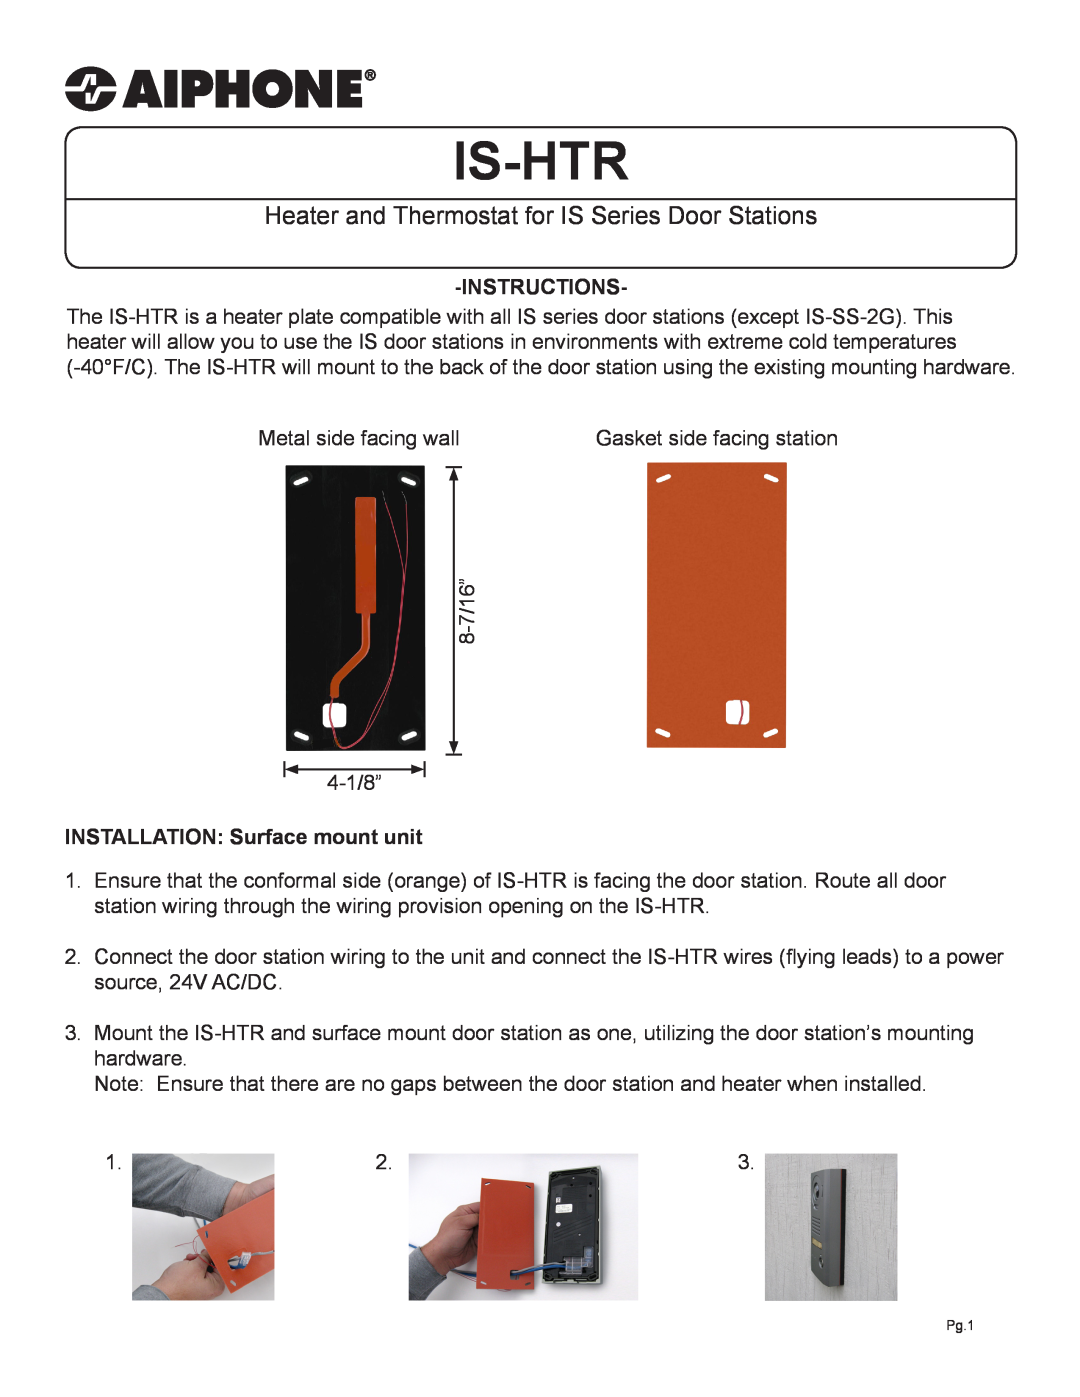 Aiphone IS-HTR manual Instructions, INSTALLATION Surface mount unit, Is-Htr 